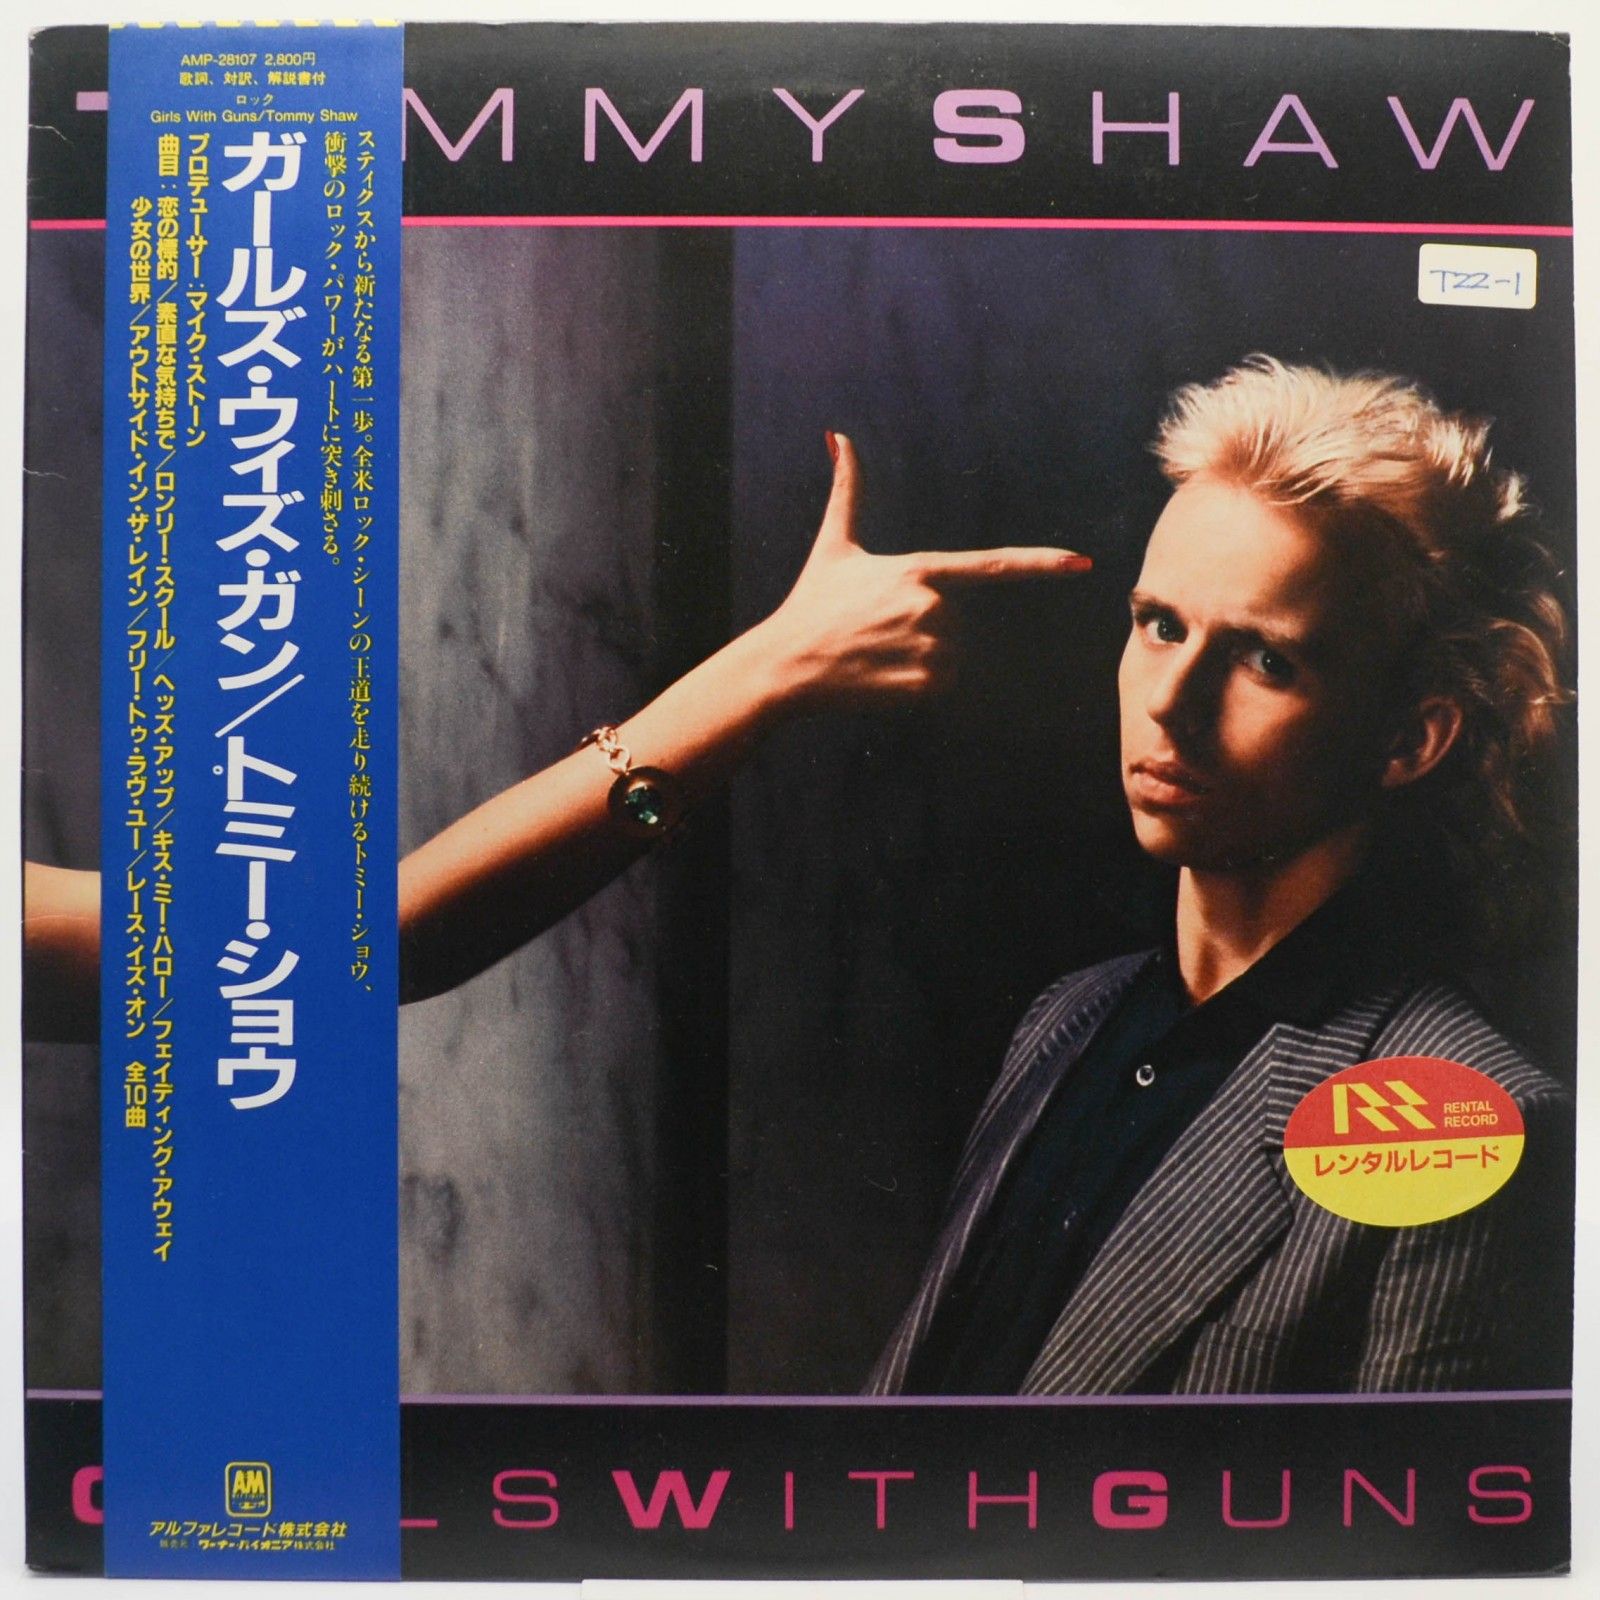 Tommy Shaw — Girls With Guns, 1984